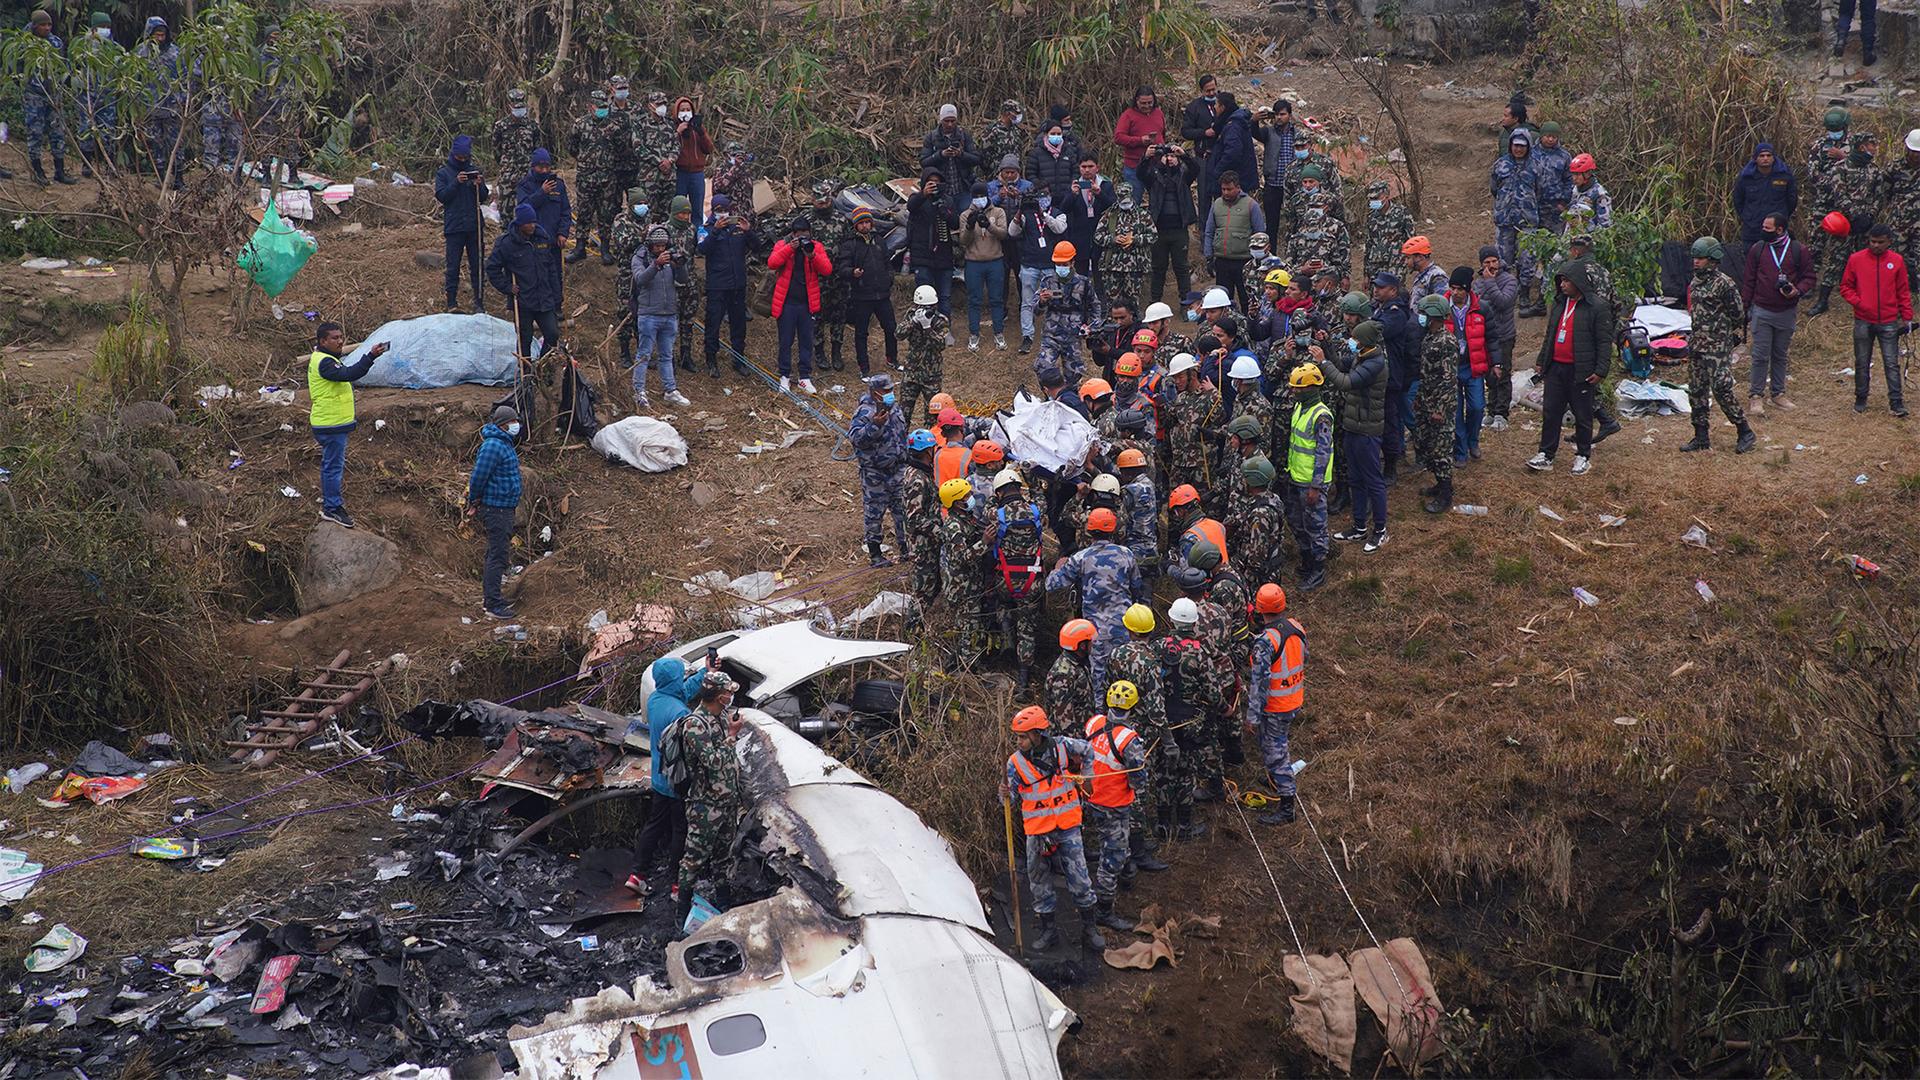 Rescuers scour the crash site in the wreckage of a passenger plane in Pokhara, Nepal, Jan.16, 2023.